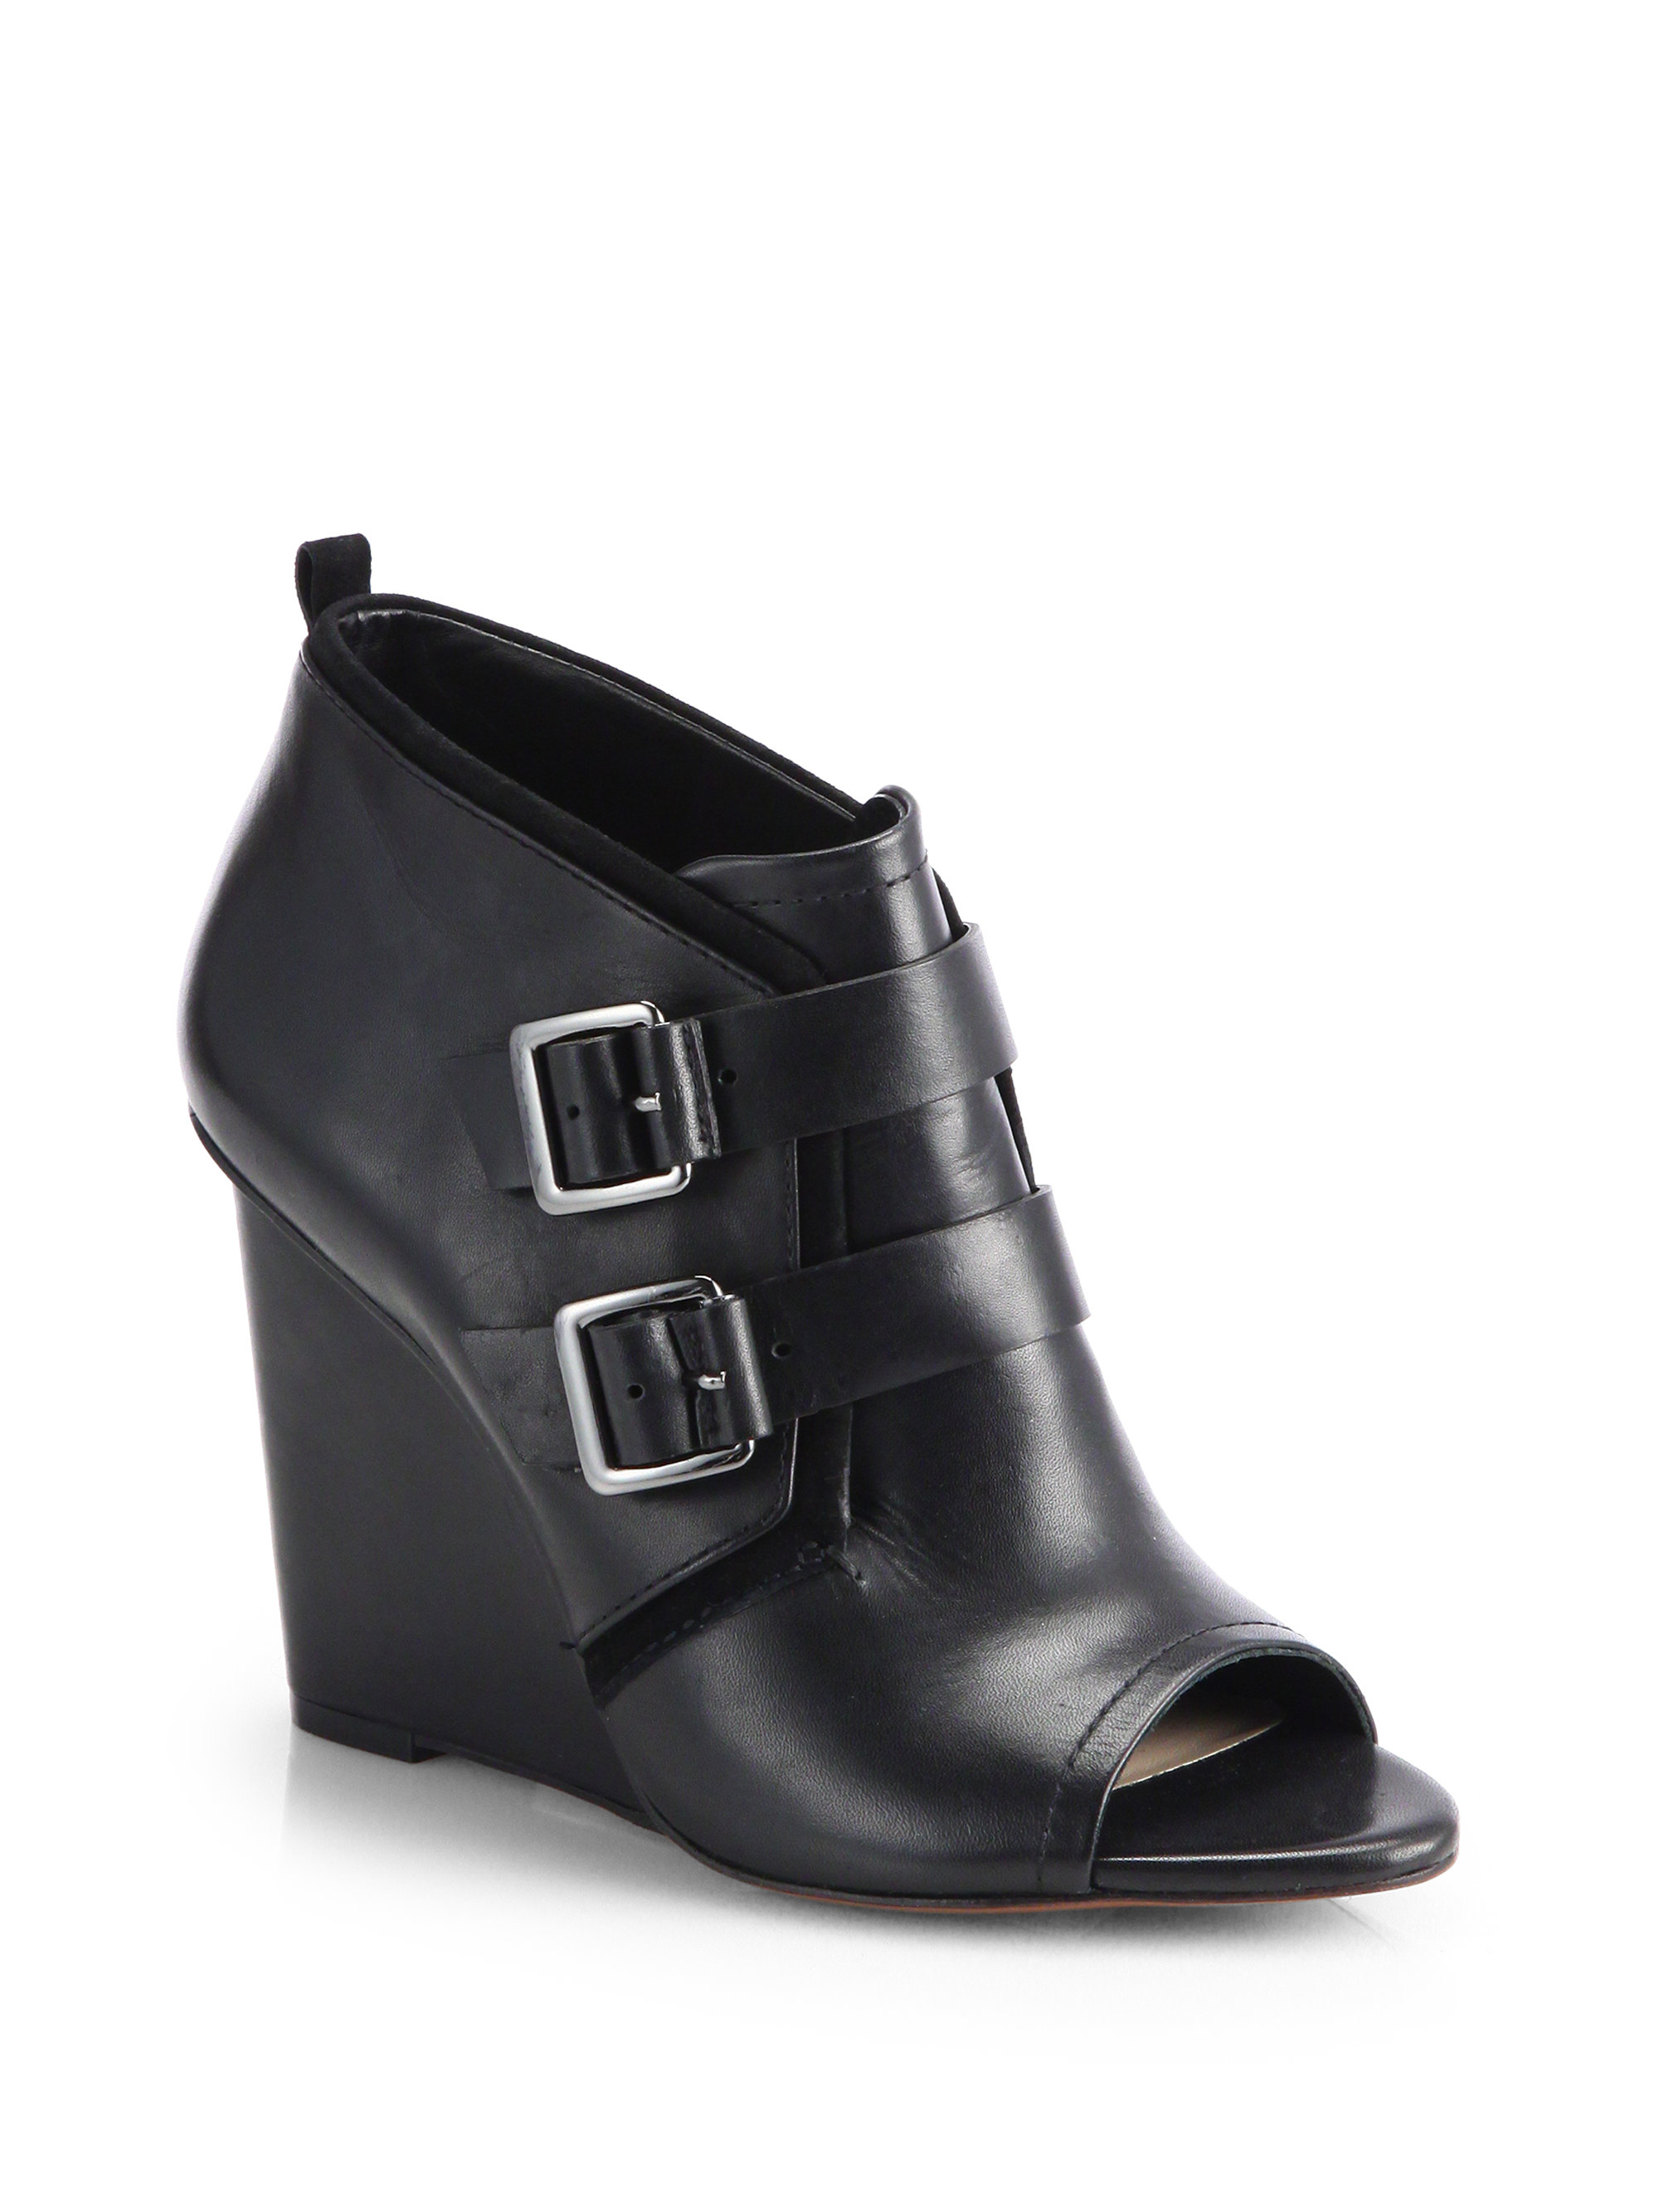 10 Crosby Derek Lam Zale Leather Buckledetail Wedge Ankle Boots in ...